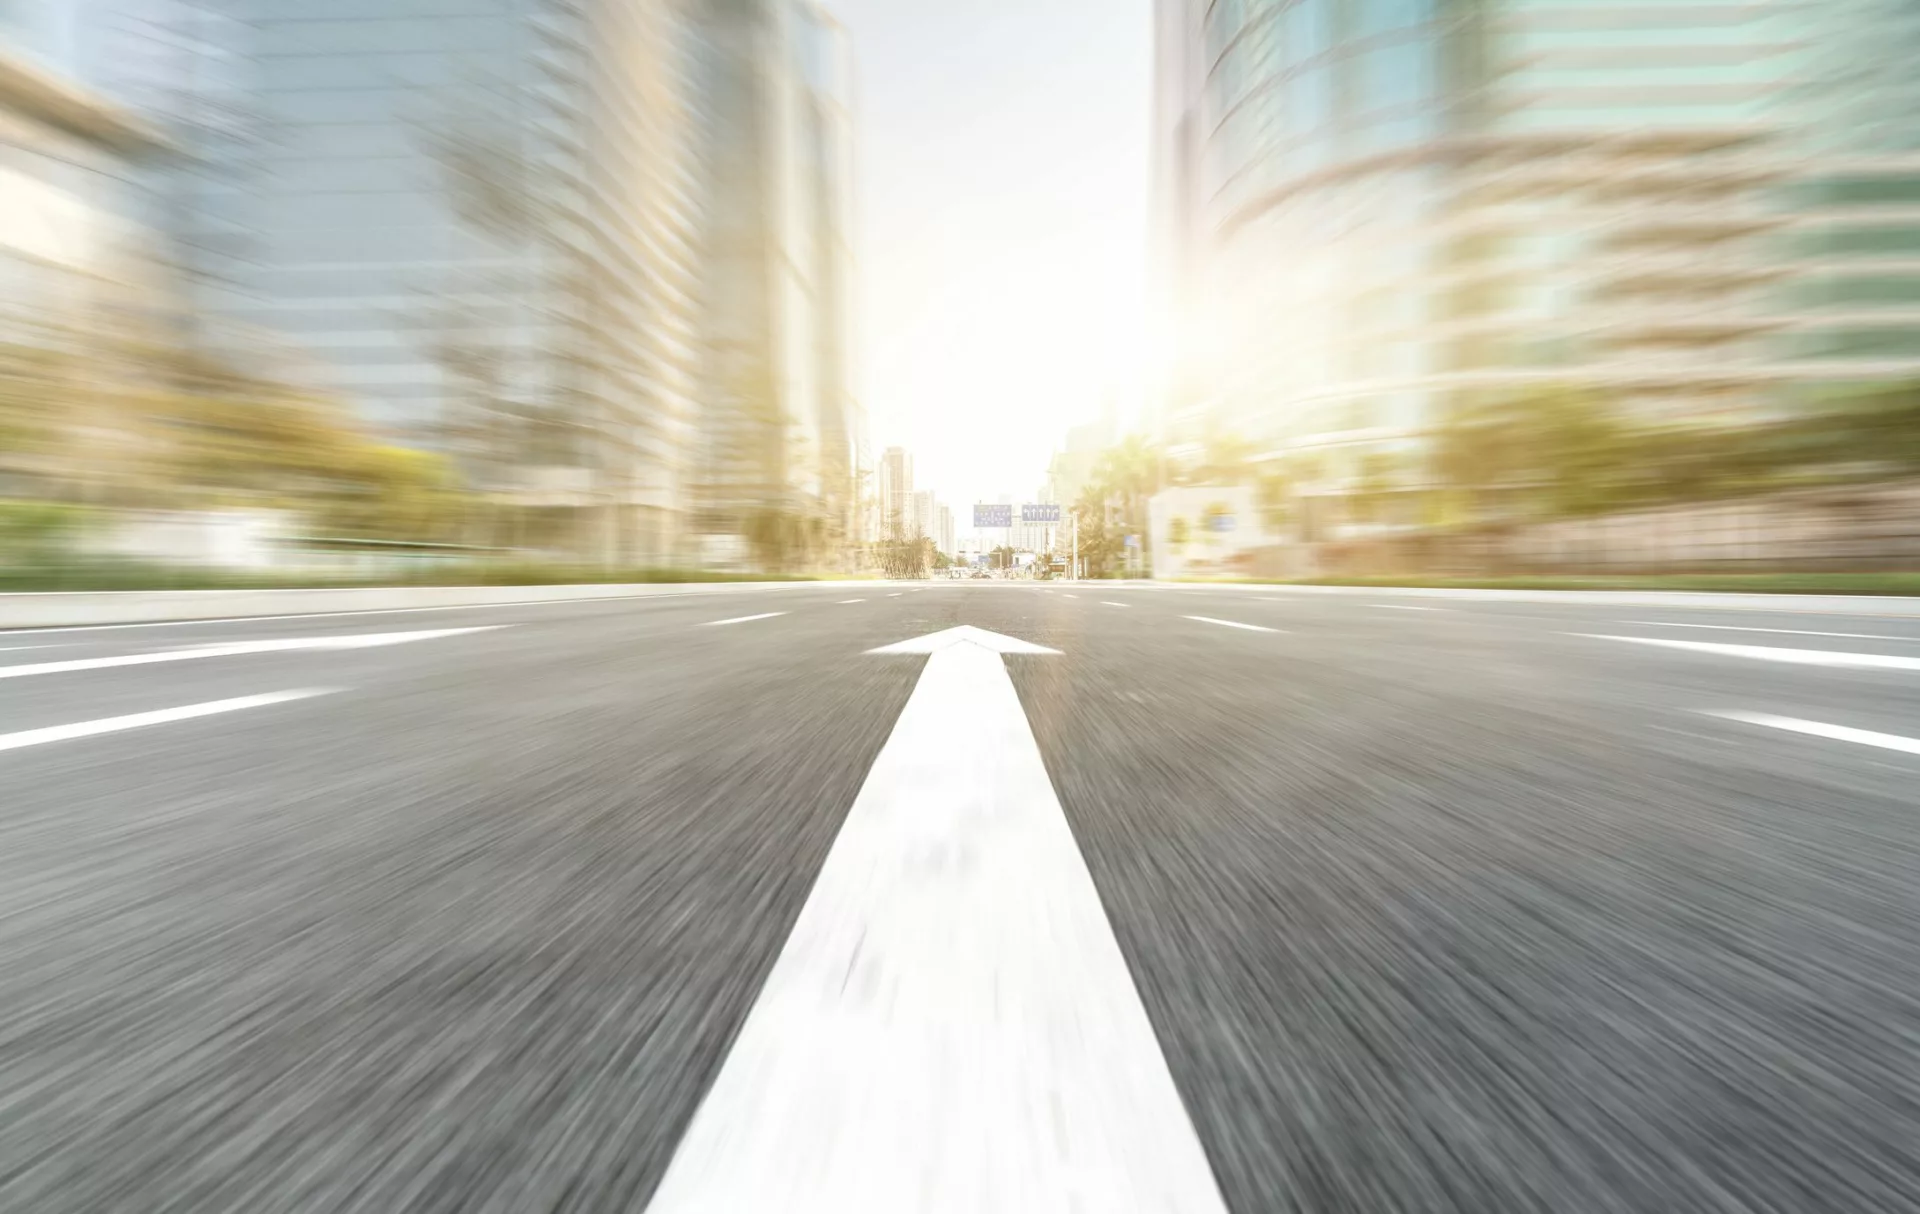 blurred highway as metaphor for delivering insights at speed of business decisions|